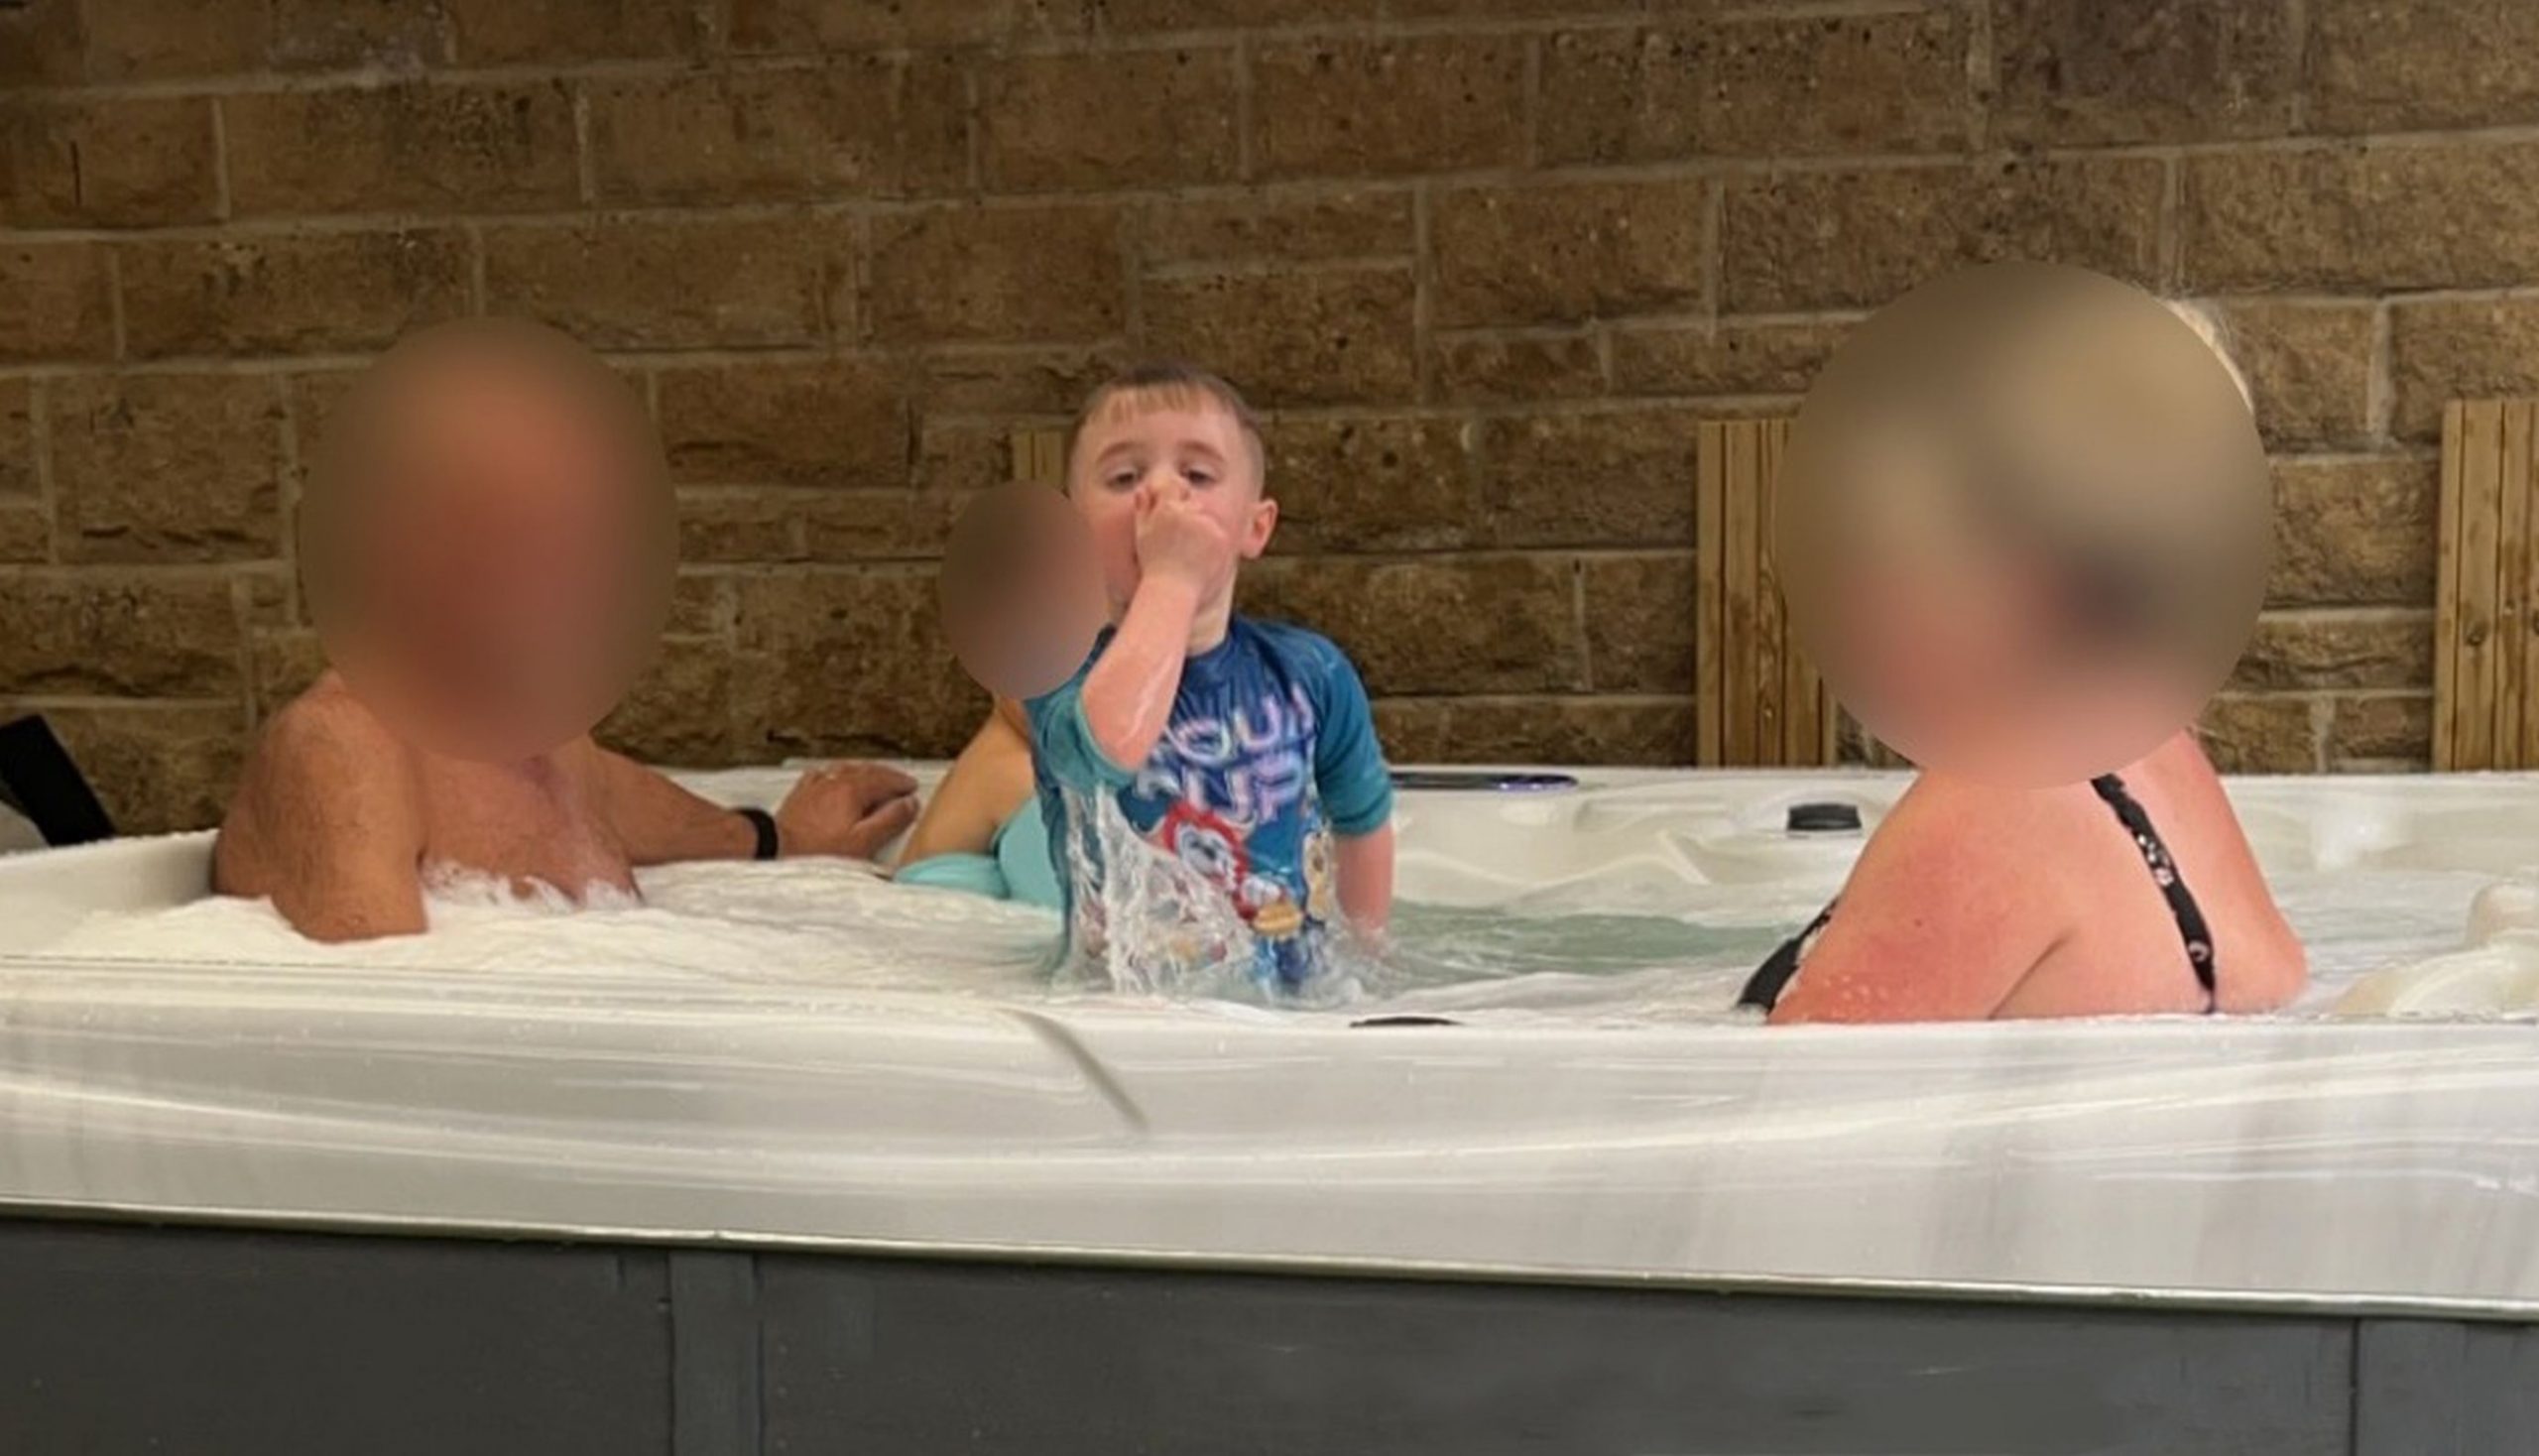 Our UK staycation turned into nightmare when son, 4, got sucked into a hot tub filter – here’s my warning to all parents